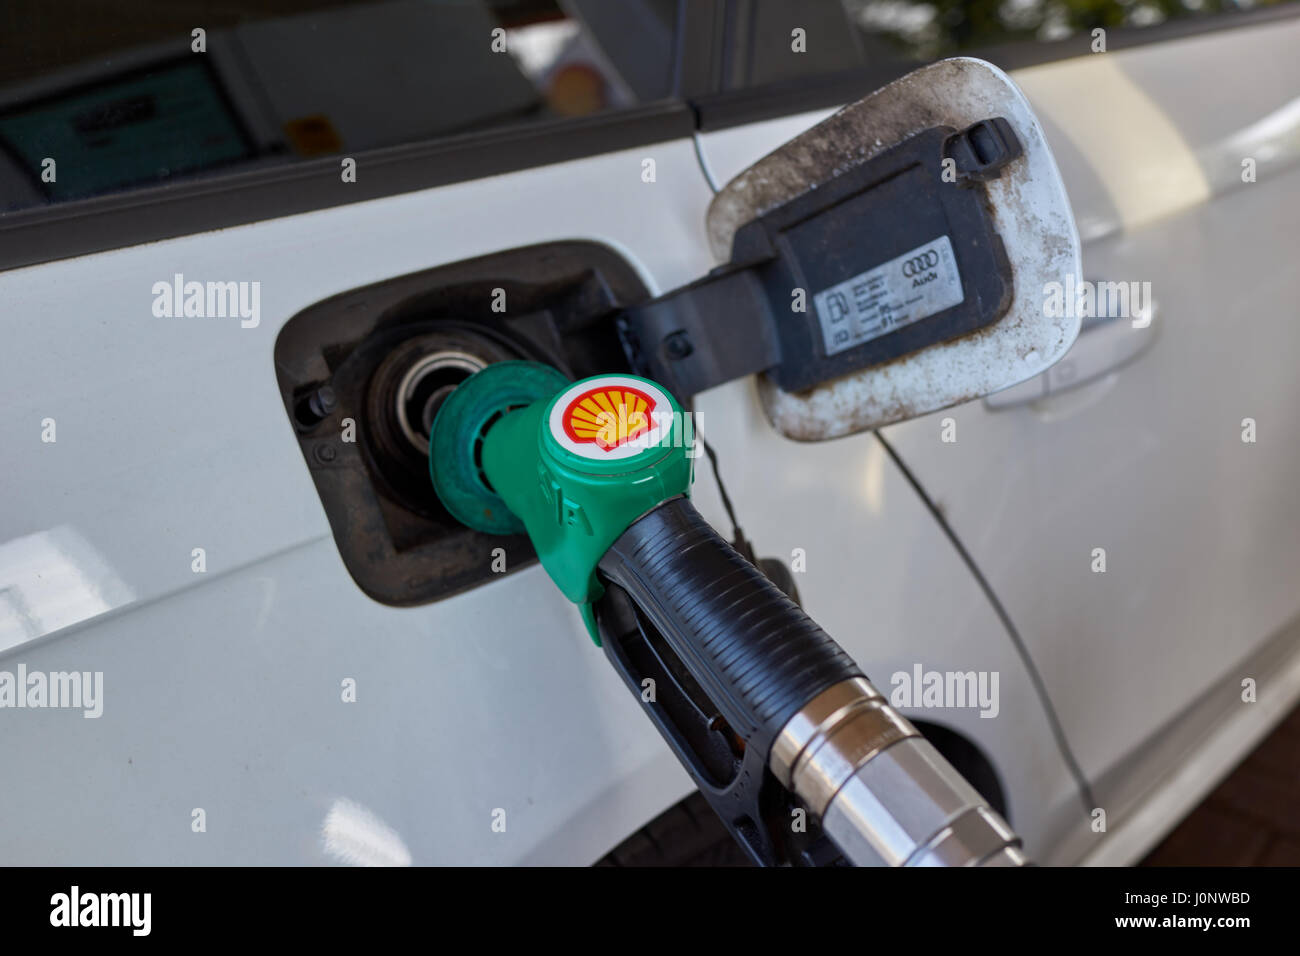 Filling up car with unleaded petrol at shell service station. Stock Photo